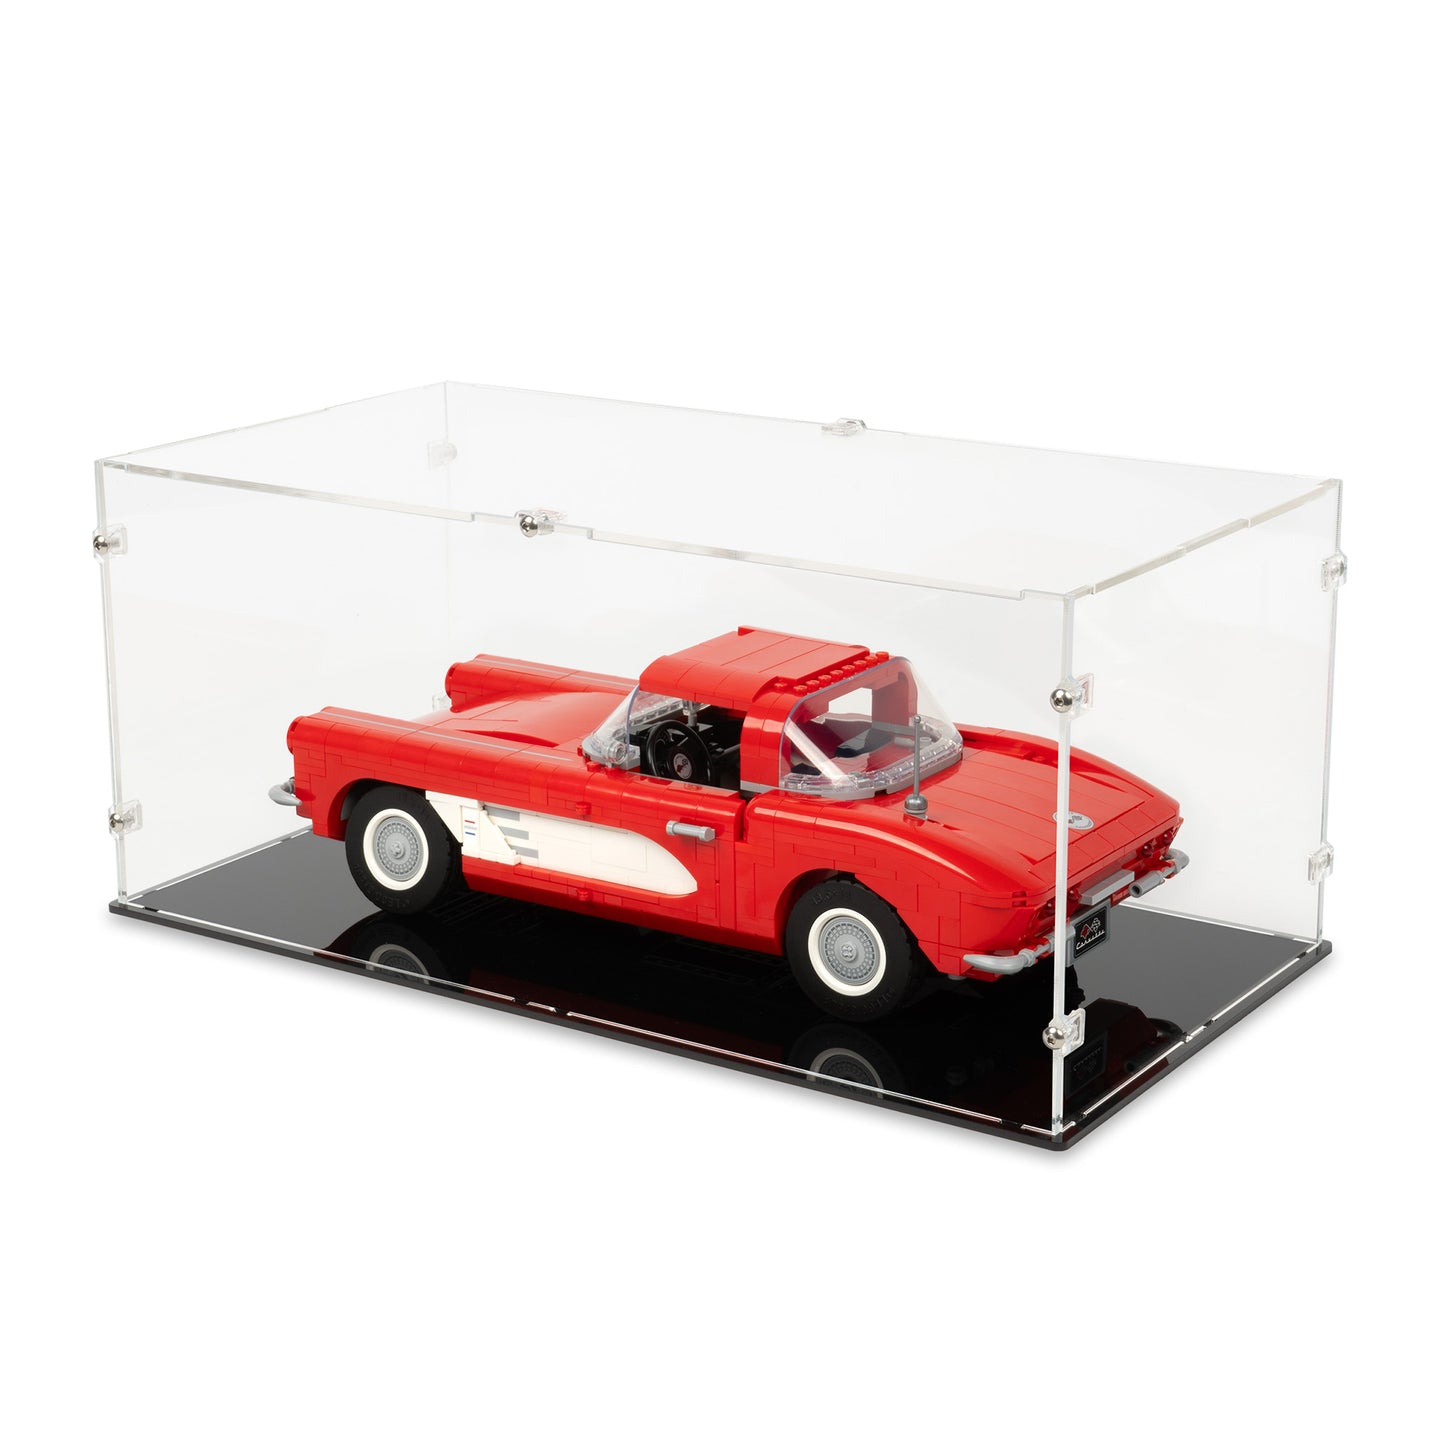 Angled top view of LEGO 10321 Chevrolet Corvette 1961 Display Case.